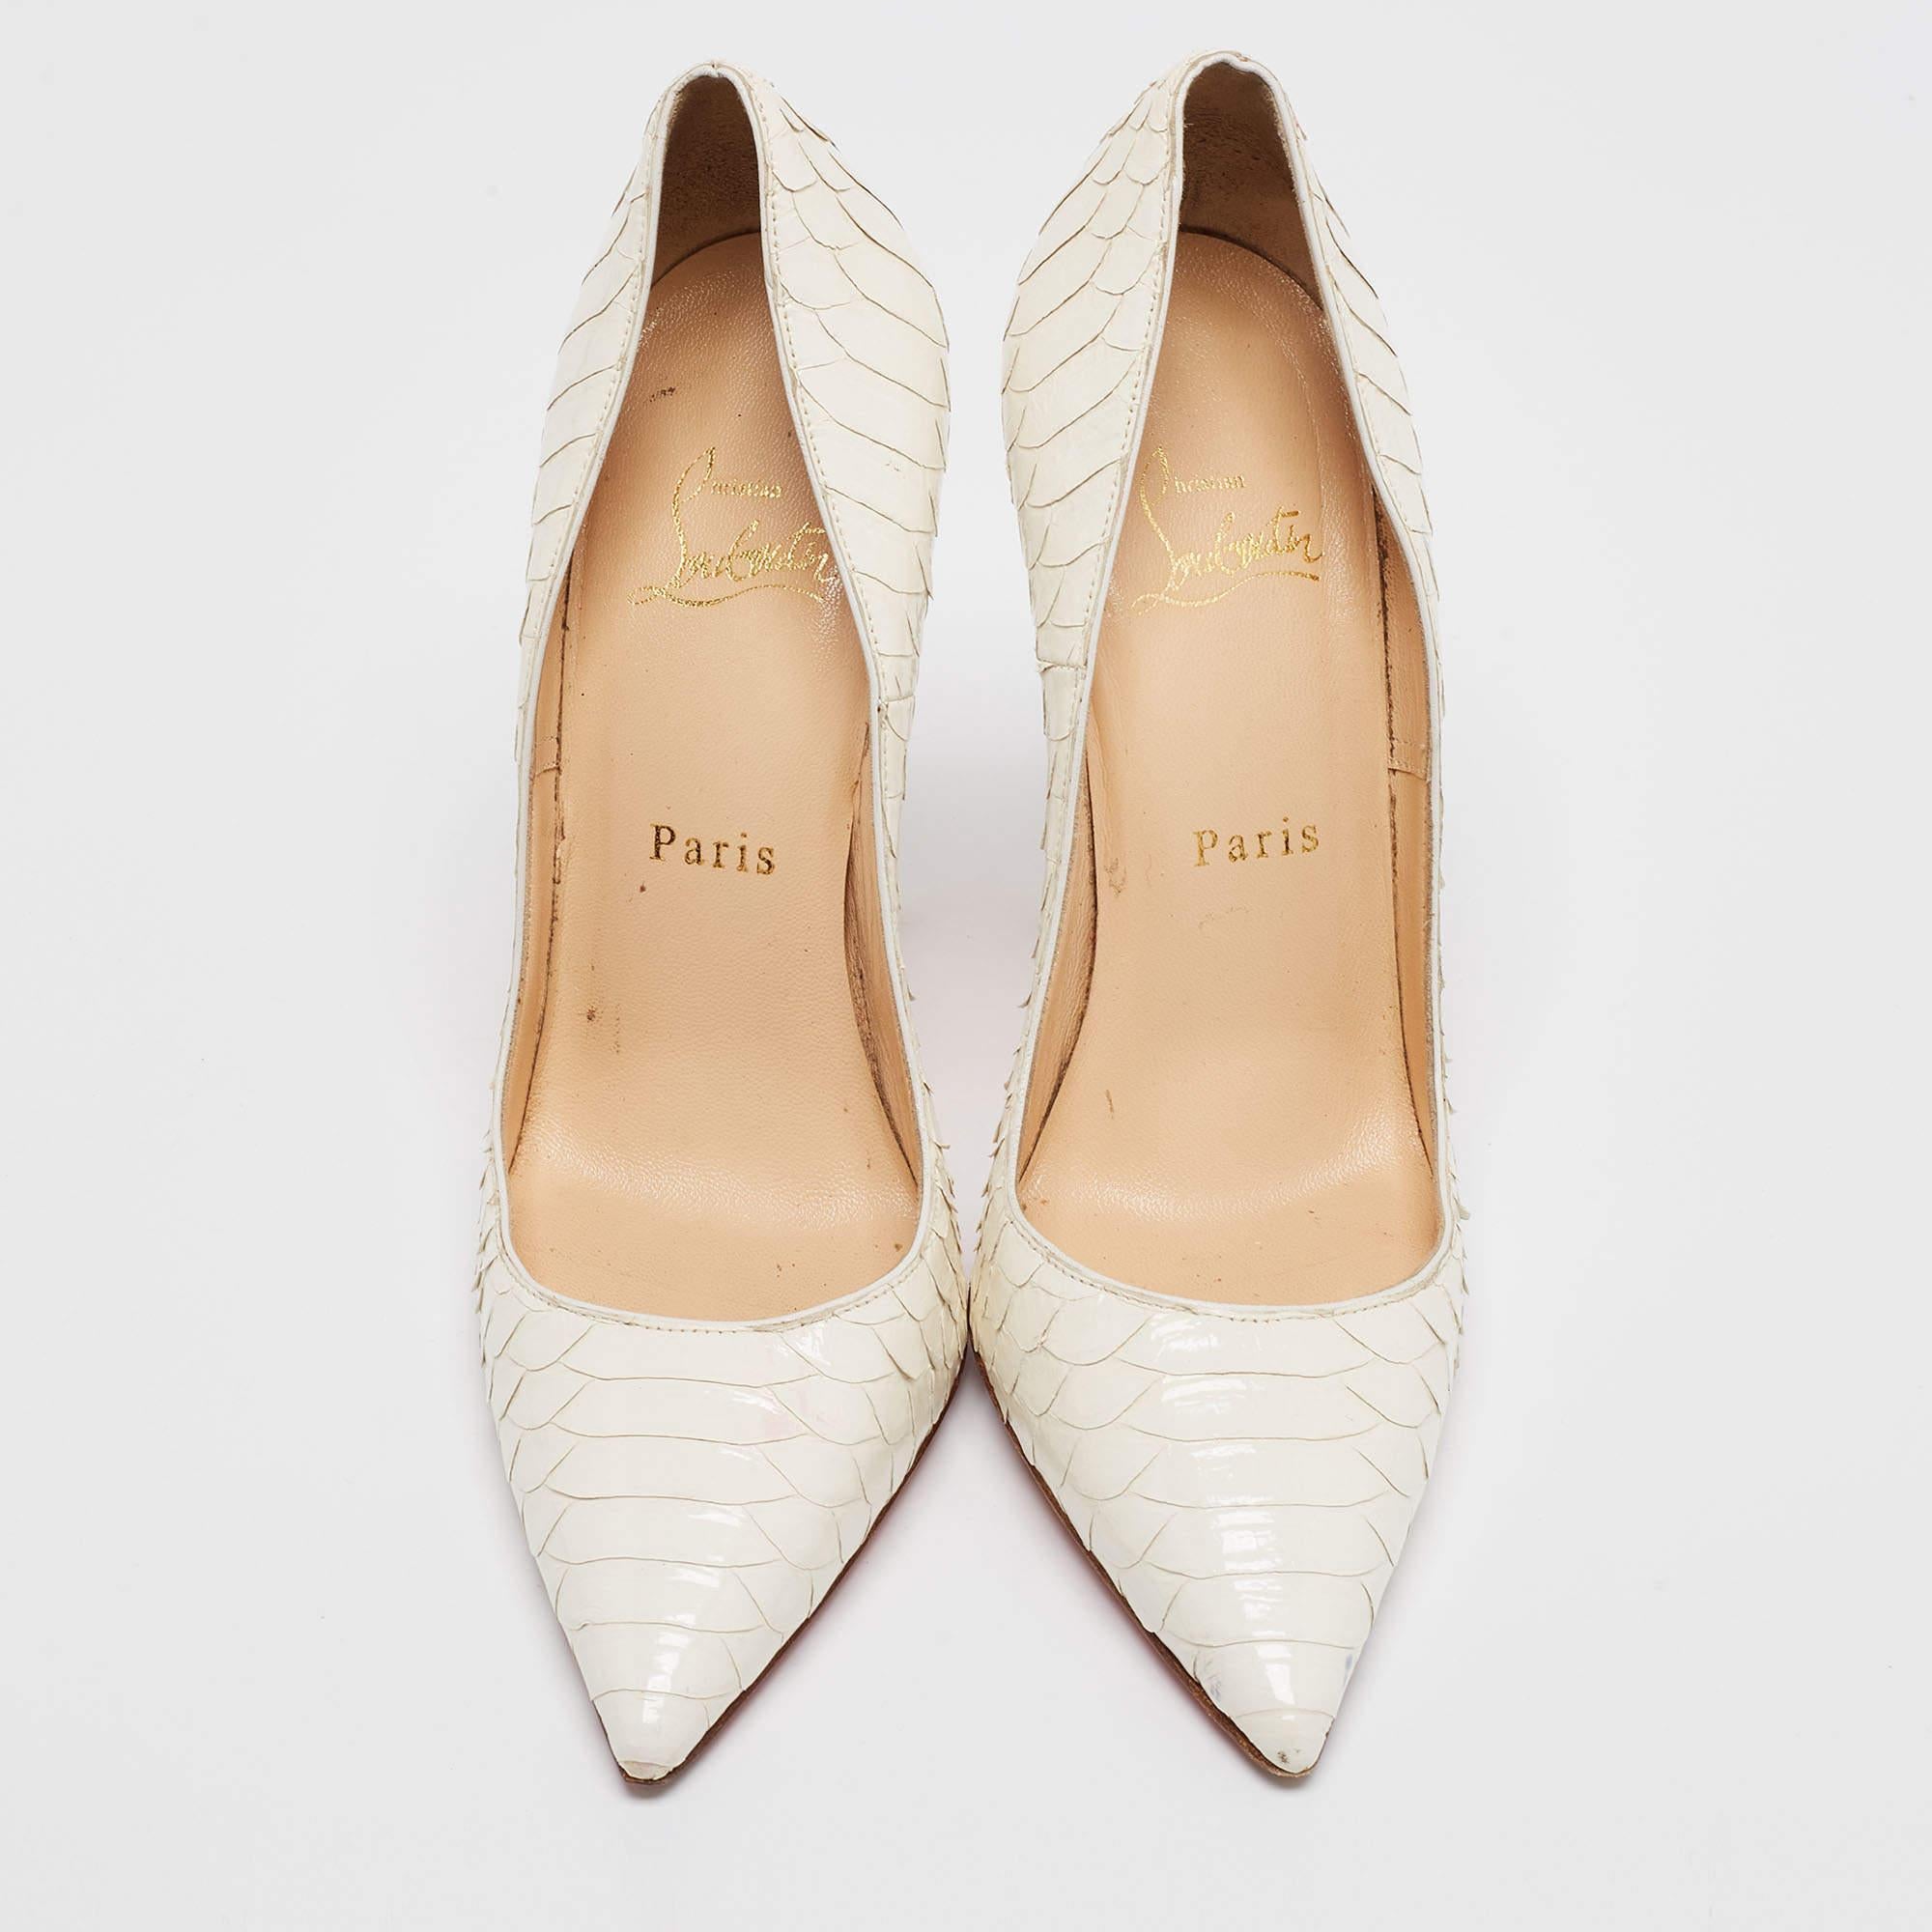 Christian Louboutin White Python Patent Leather So Kate Pumps Size 37.5 For Sale 2